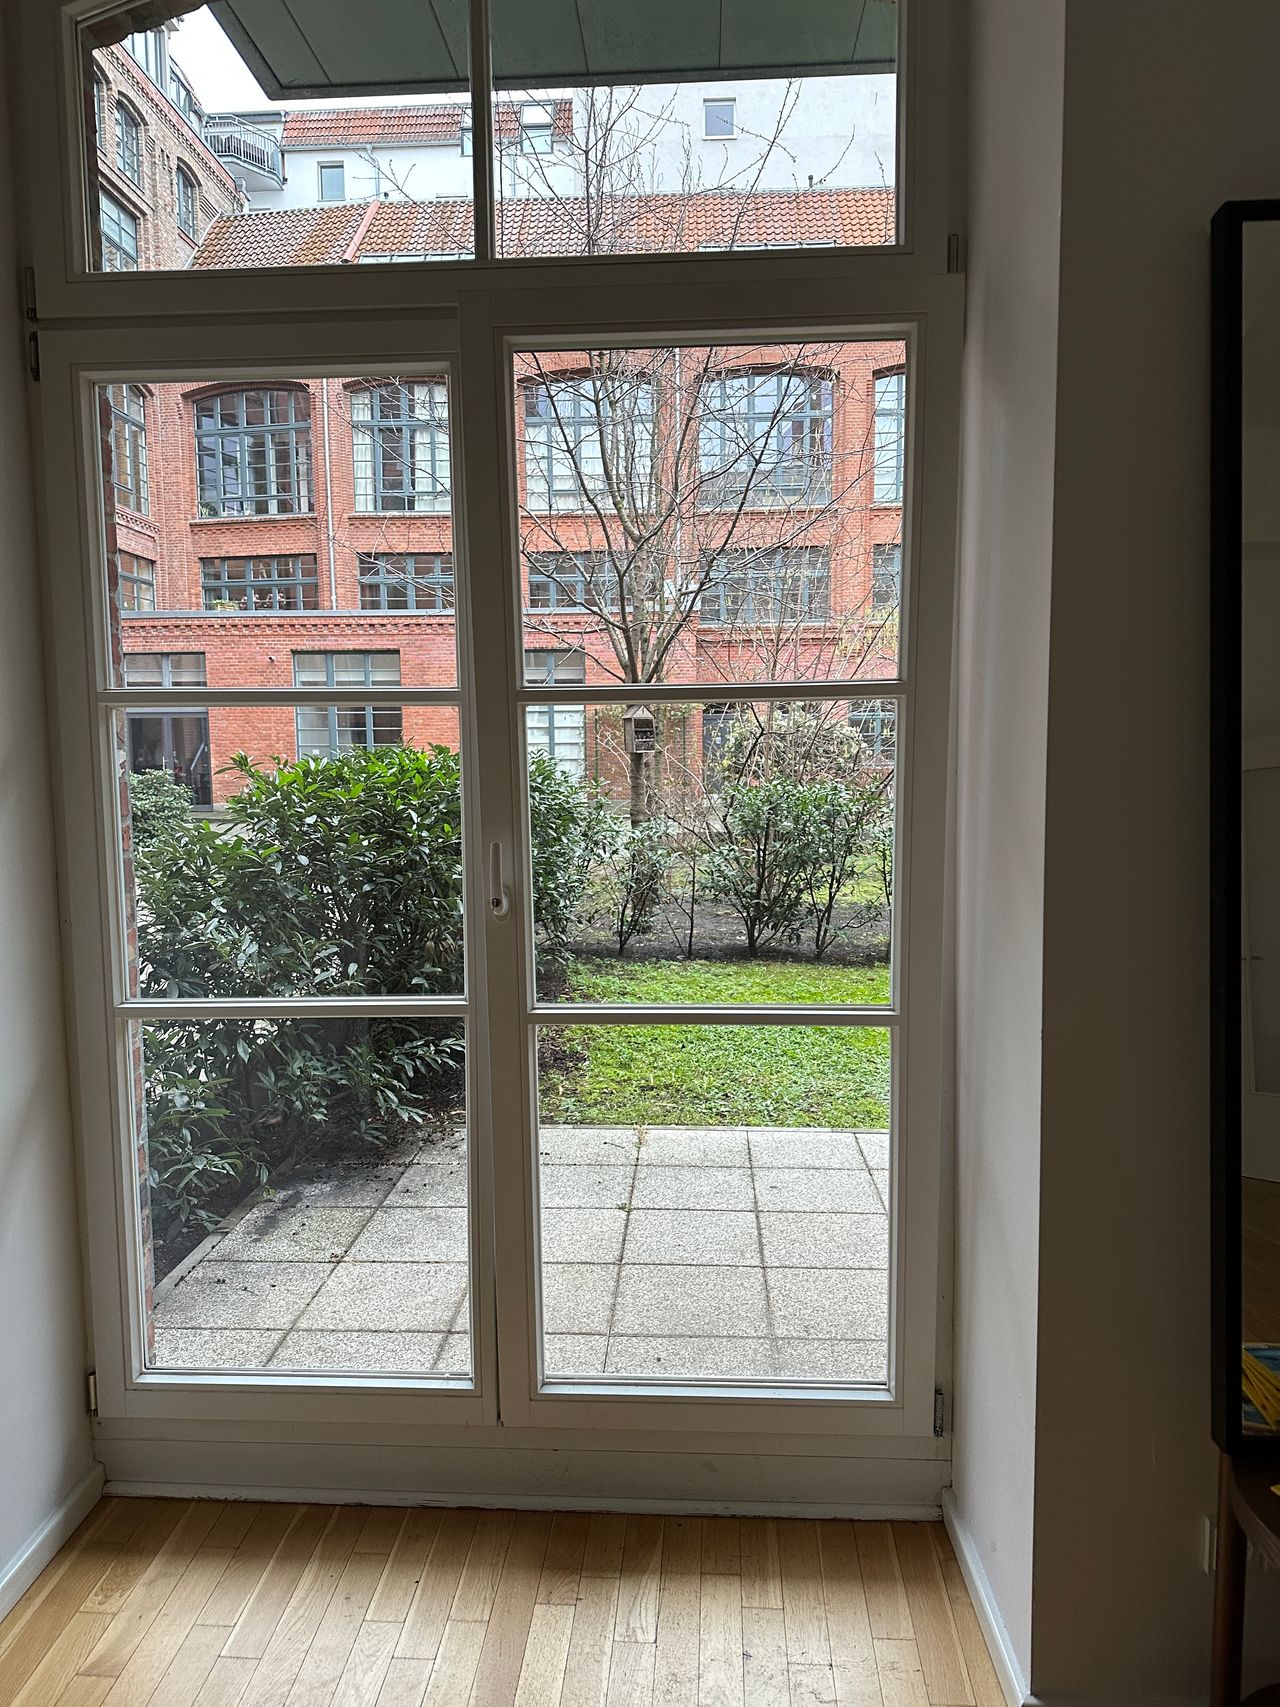 Cozy 67sqm apartment with garden in Mitte